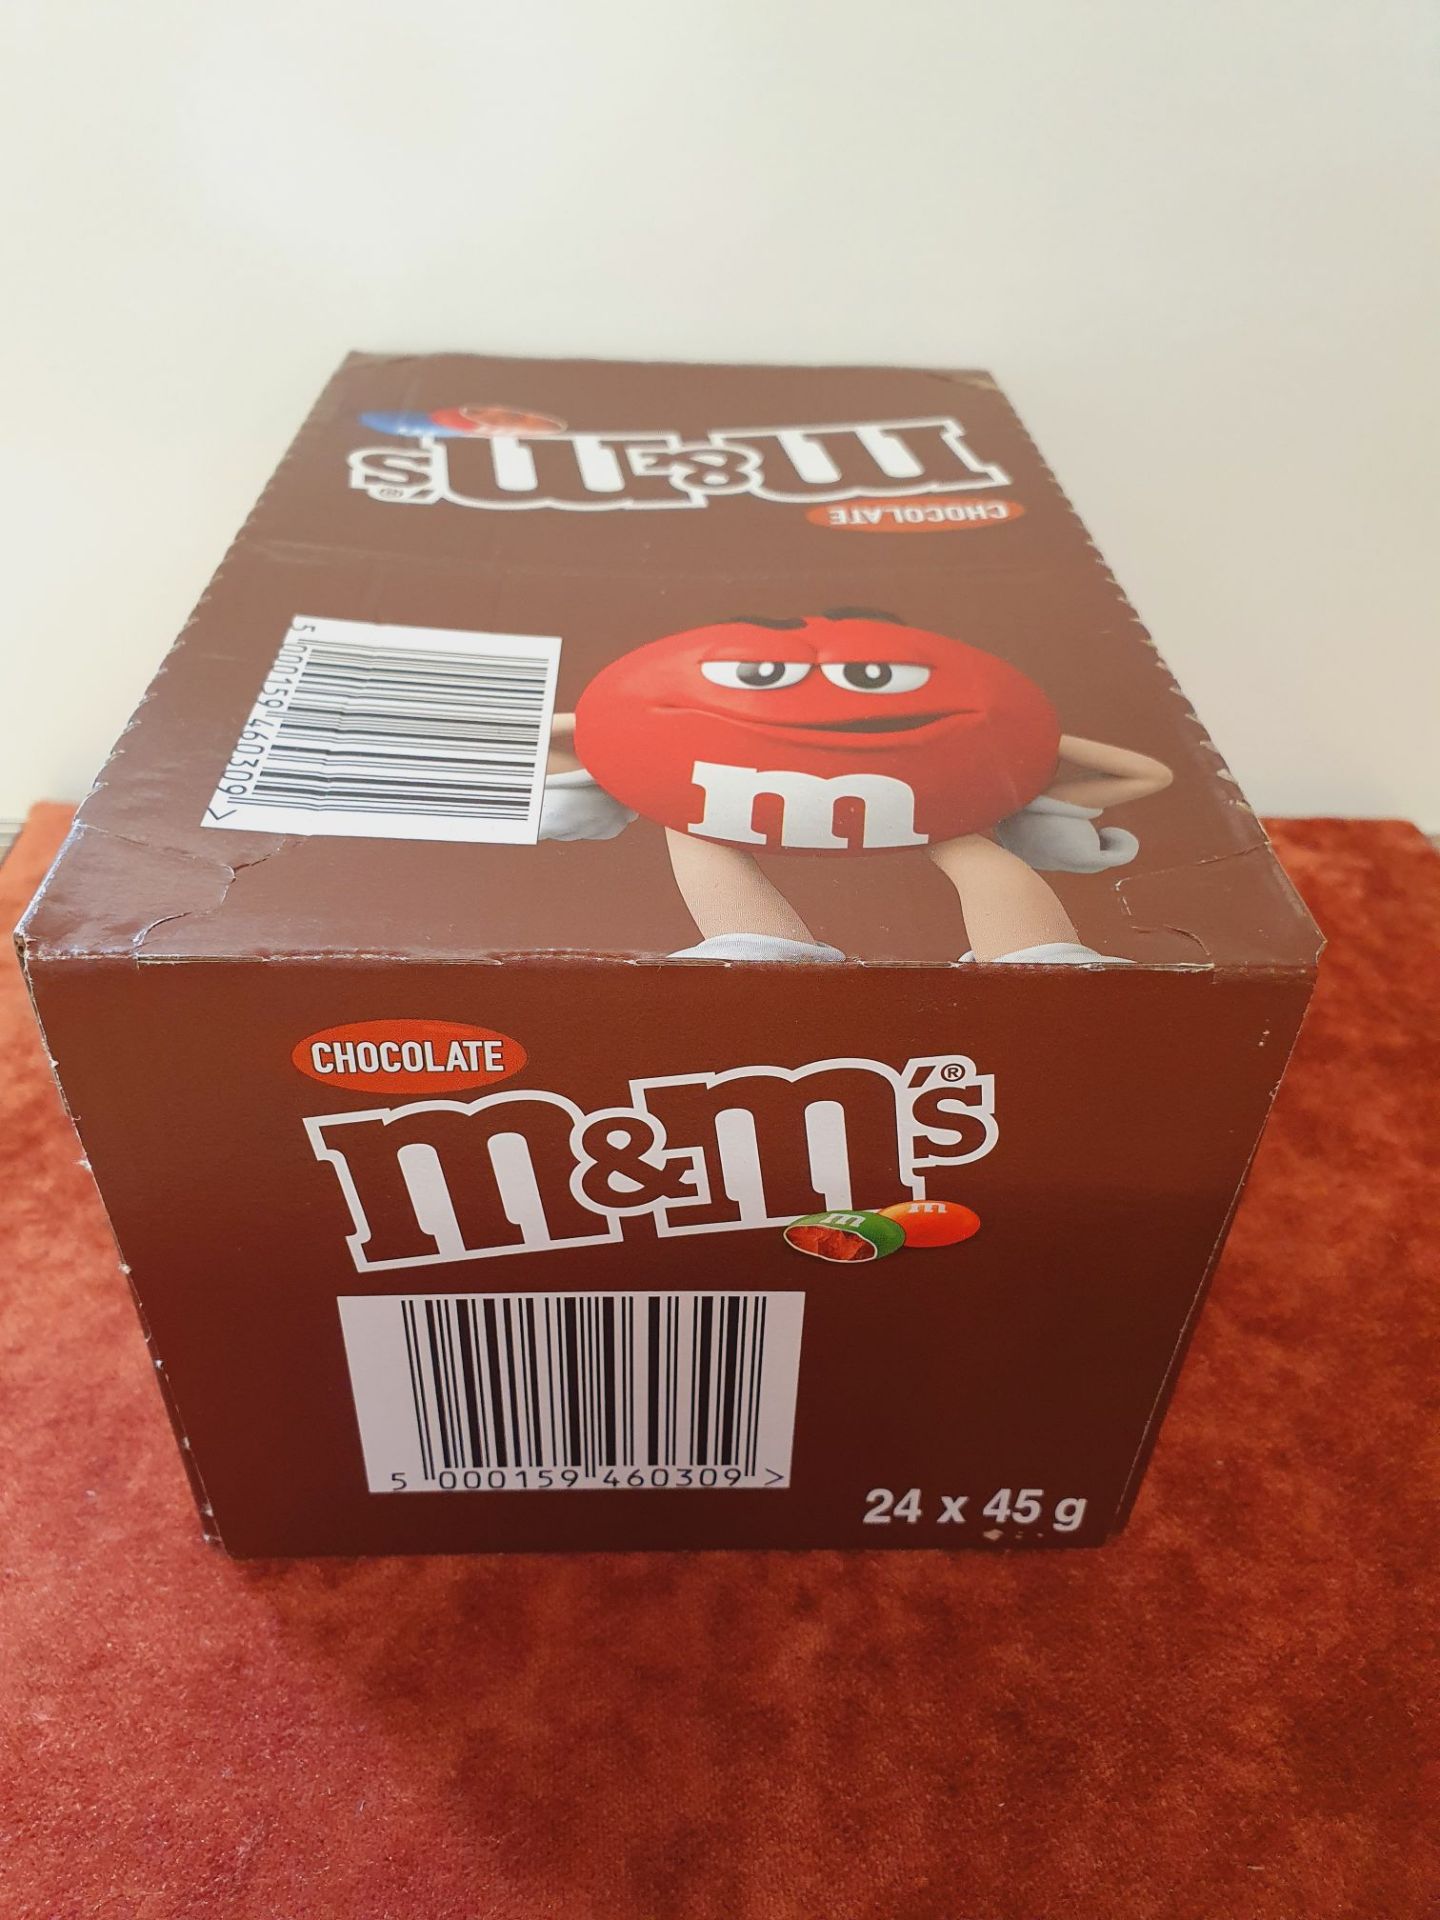 ONE LOT TO CONTAIN ONE BOX OF CHOCOLATE M&M'S. 24 PACKS IN BOX, 45G PER PACK. BEST BEFORE 29/11/20